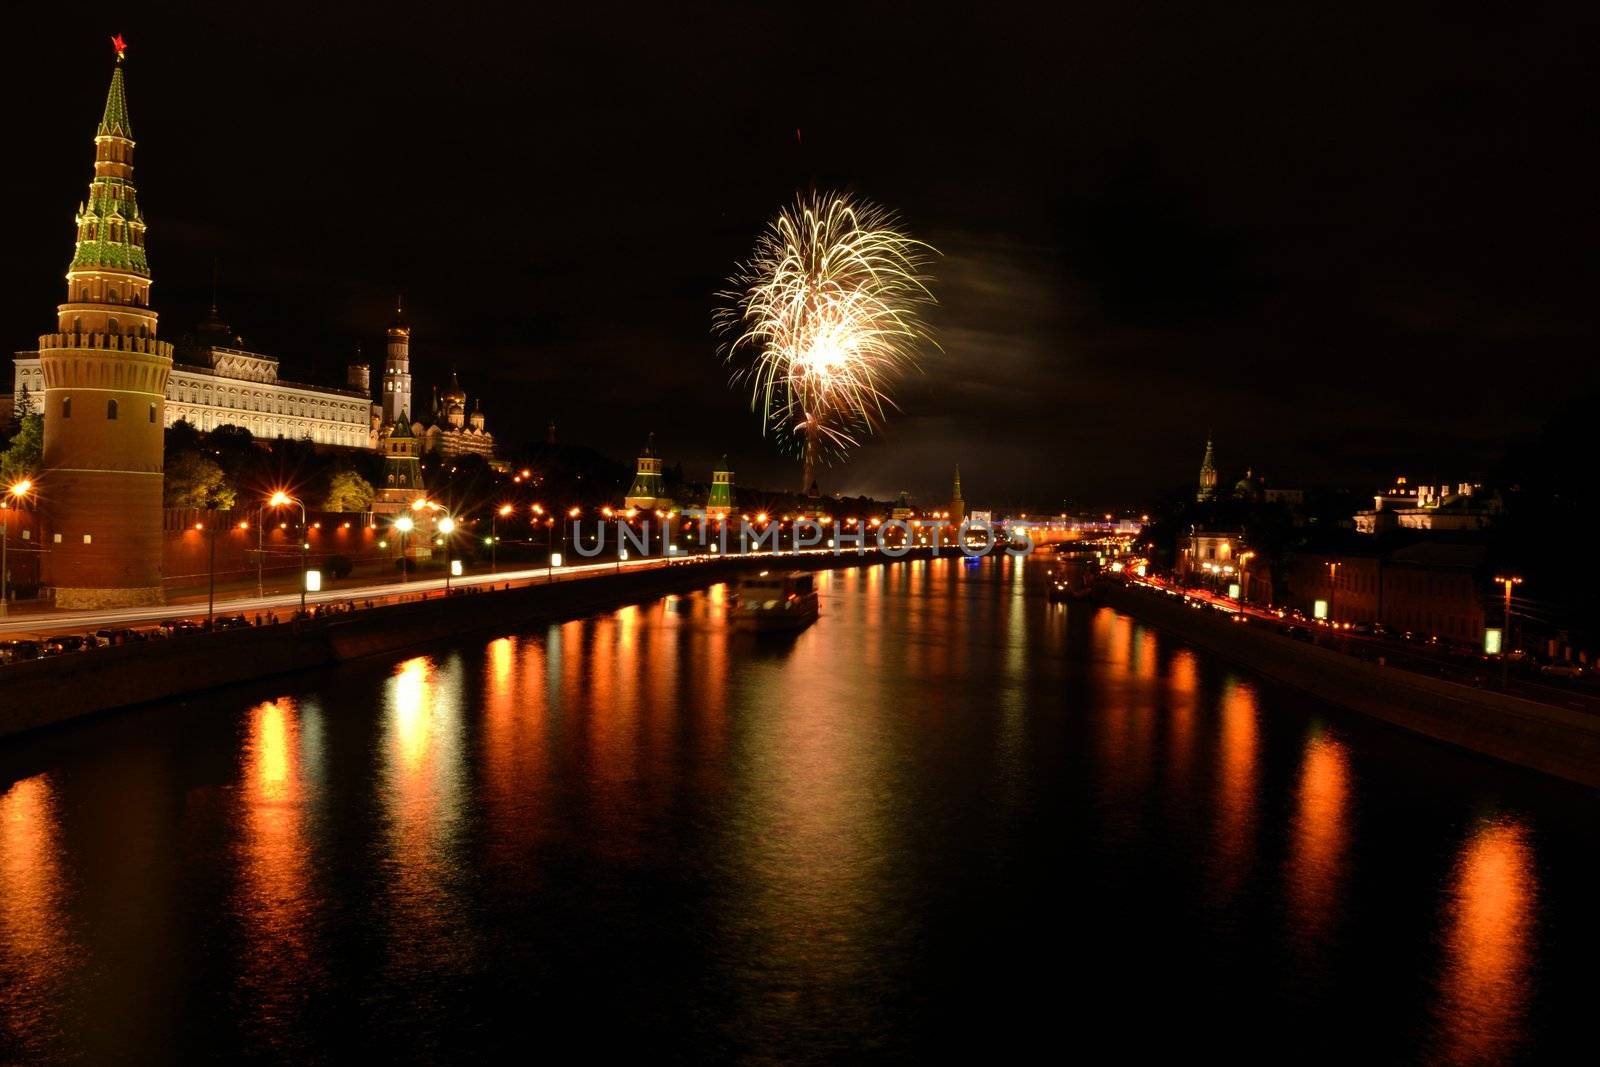 Firework over the Moscow river